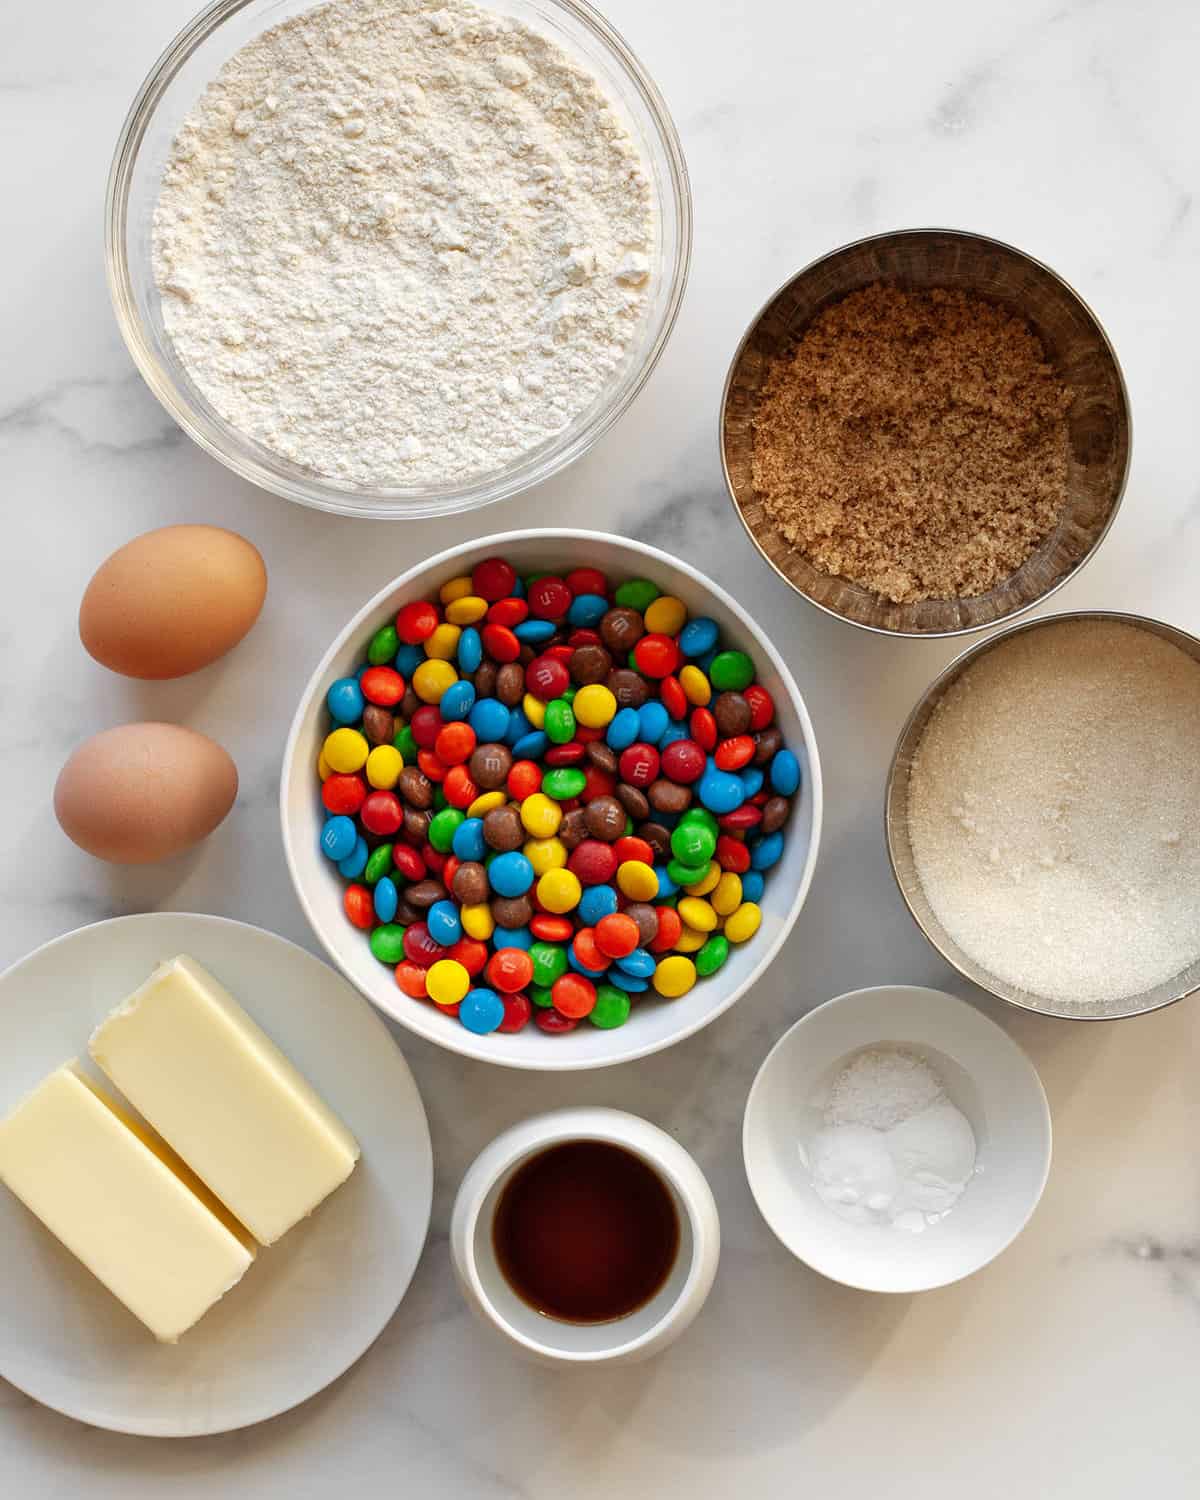 Ingredients including m&ms, flour, sugar, butter, vanilla extract, eggs, baking powder, baking soda and salt.